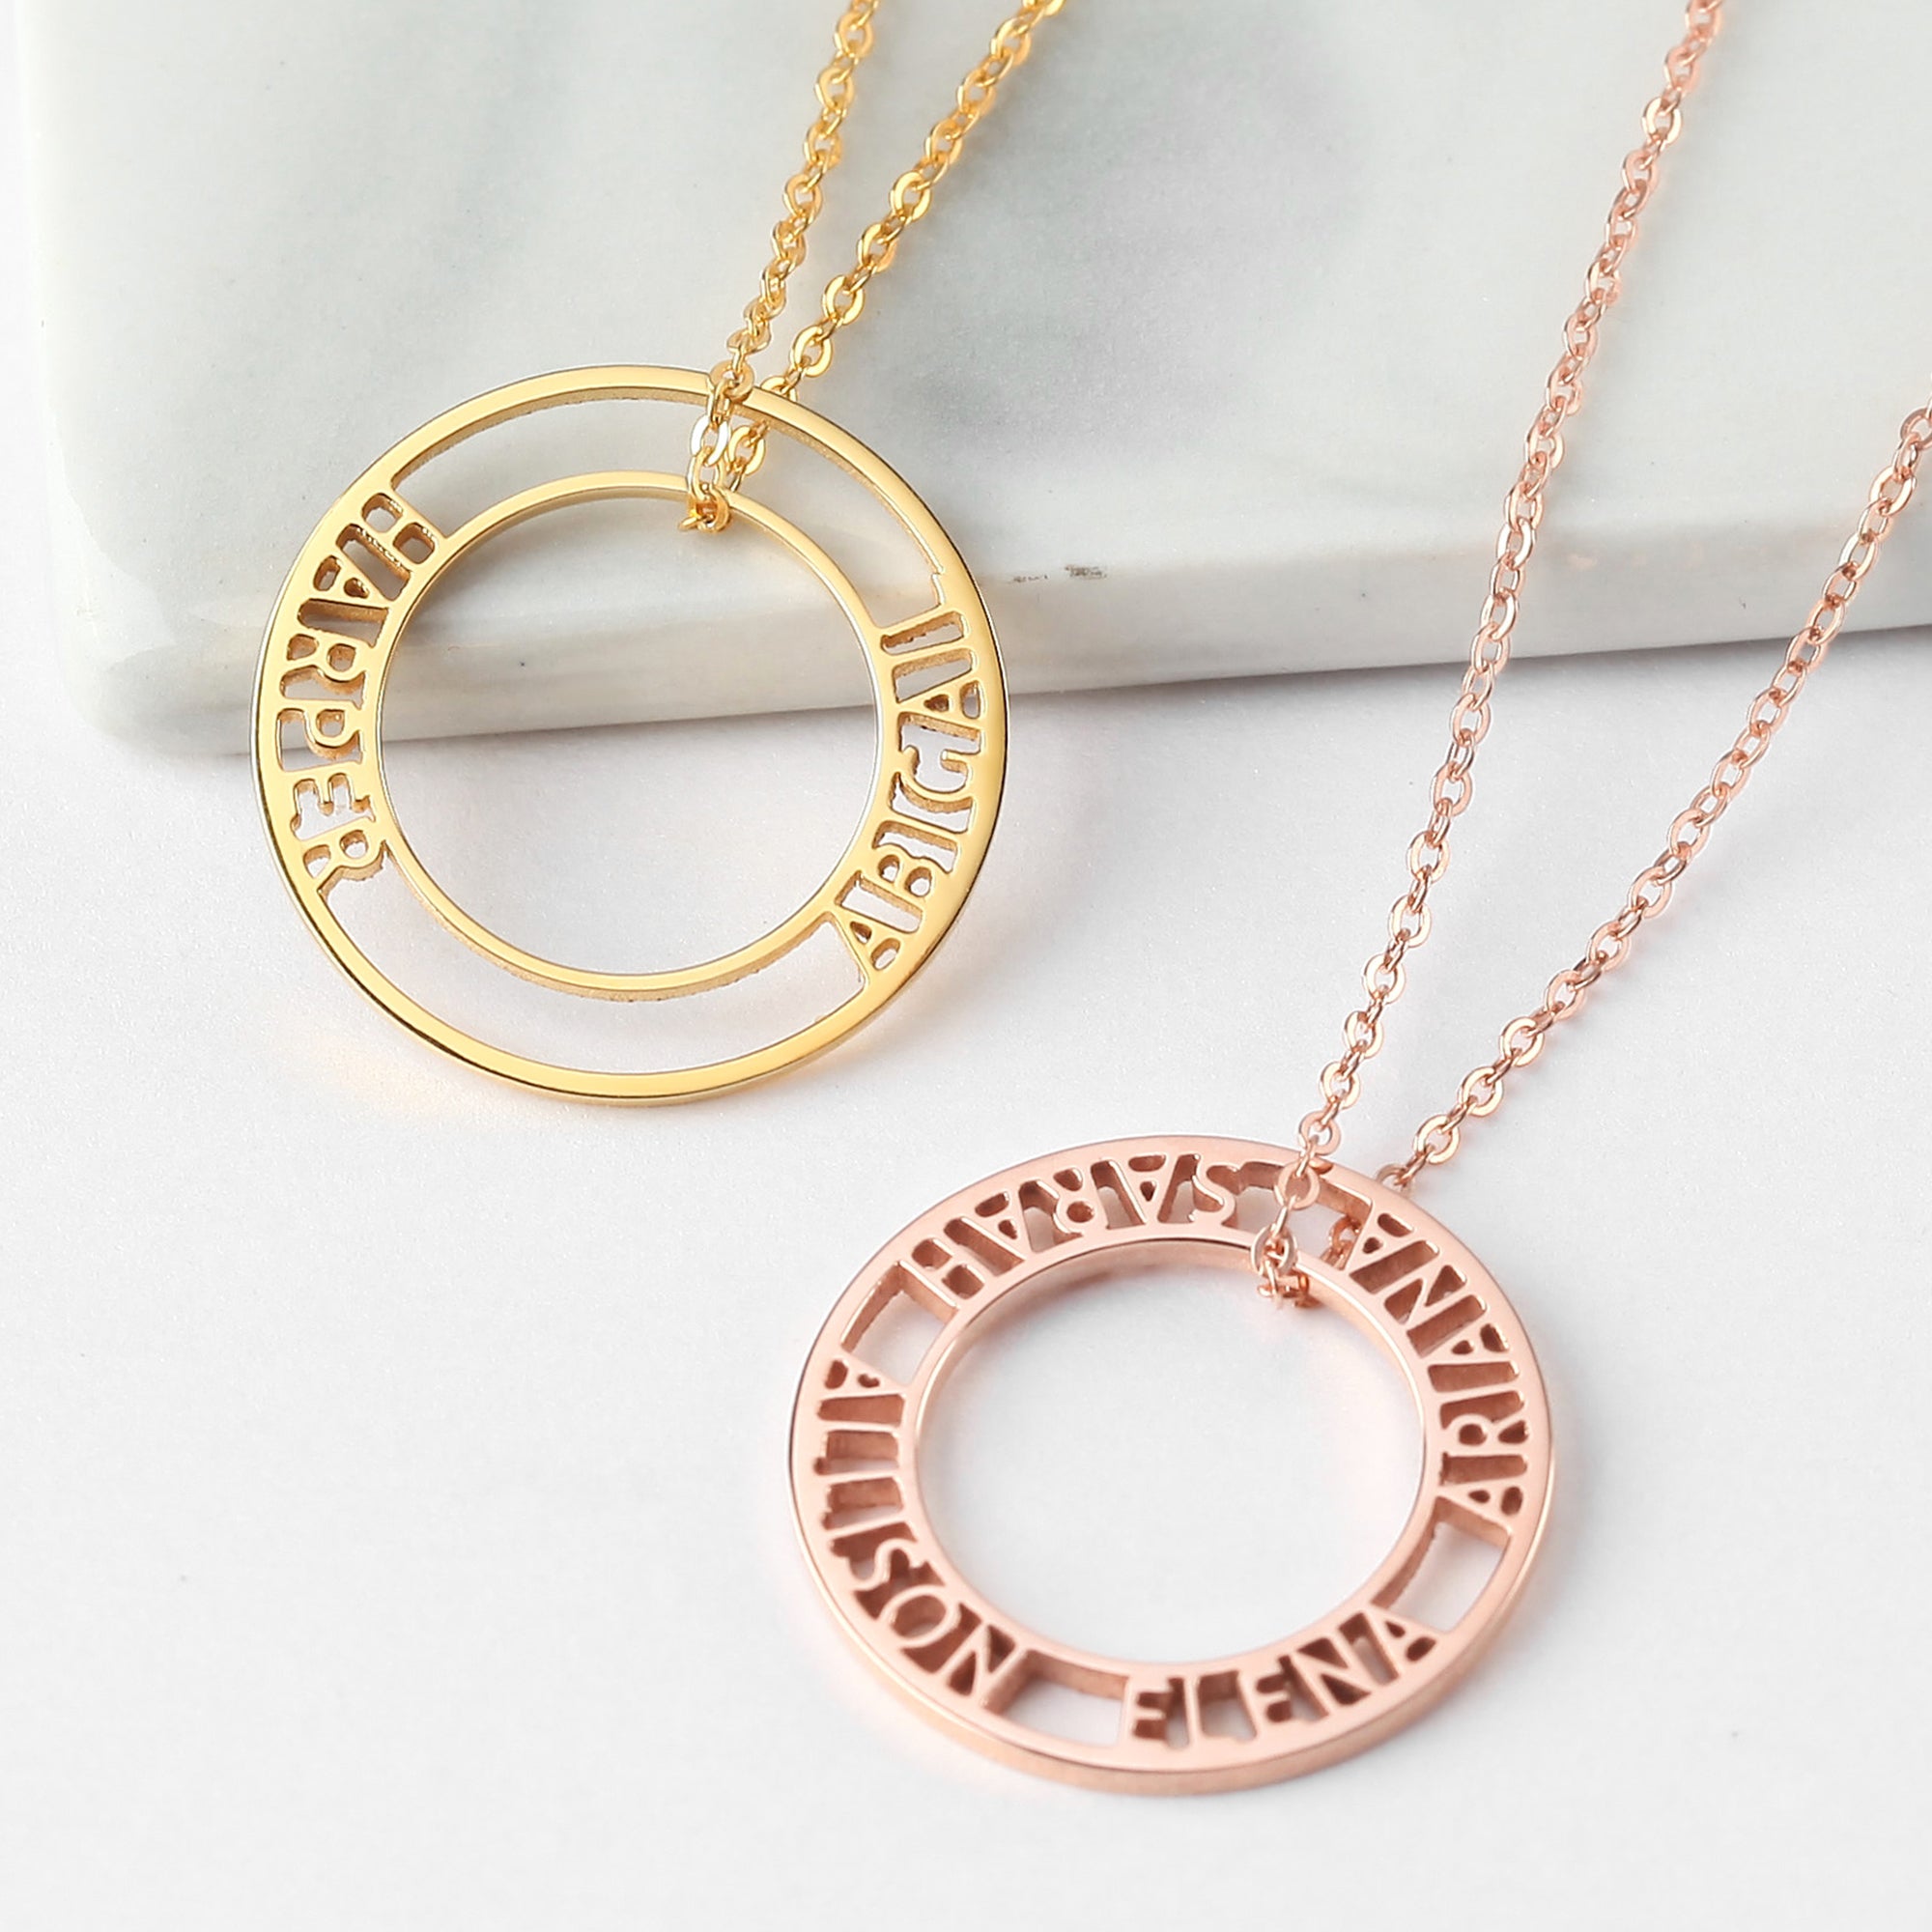 Personalized Name Necklace - Solid Sterling Silver with Gold/Rose Gold Plating - Safe for Sensitive Skin - Perfect Gift for Any Occasion - Necklaces - Bijou Her -  -  - 